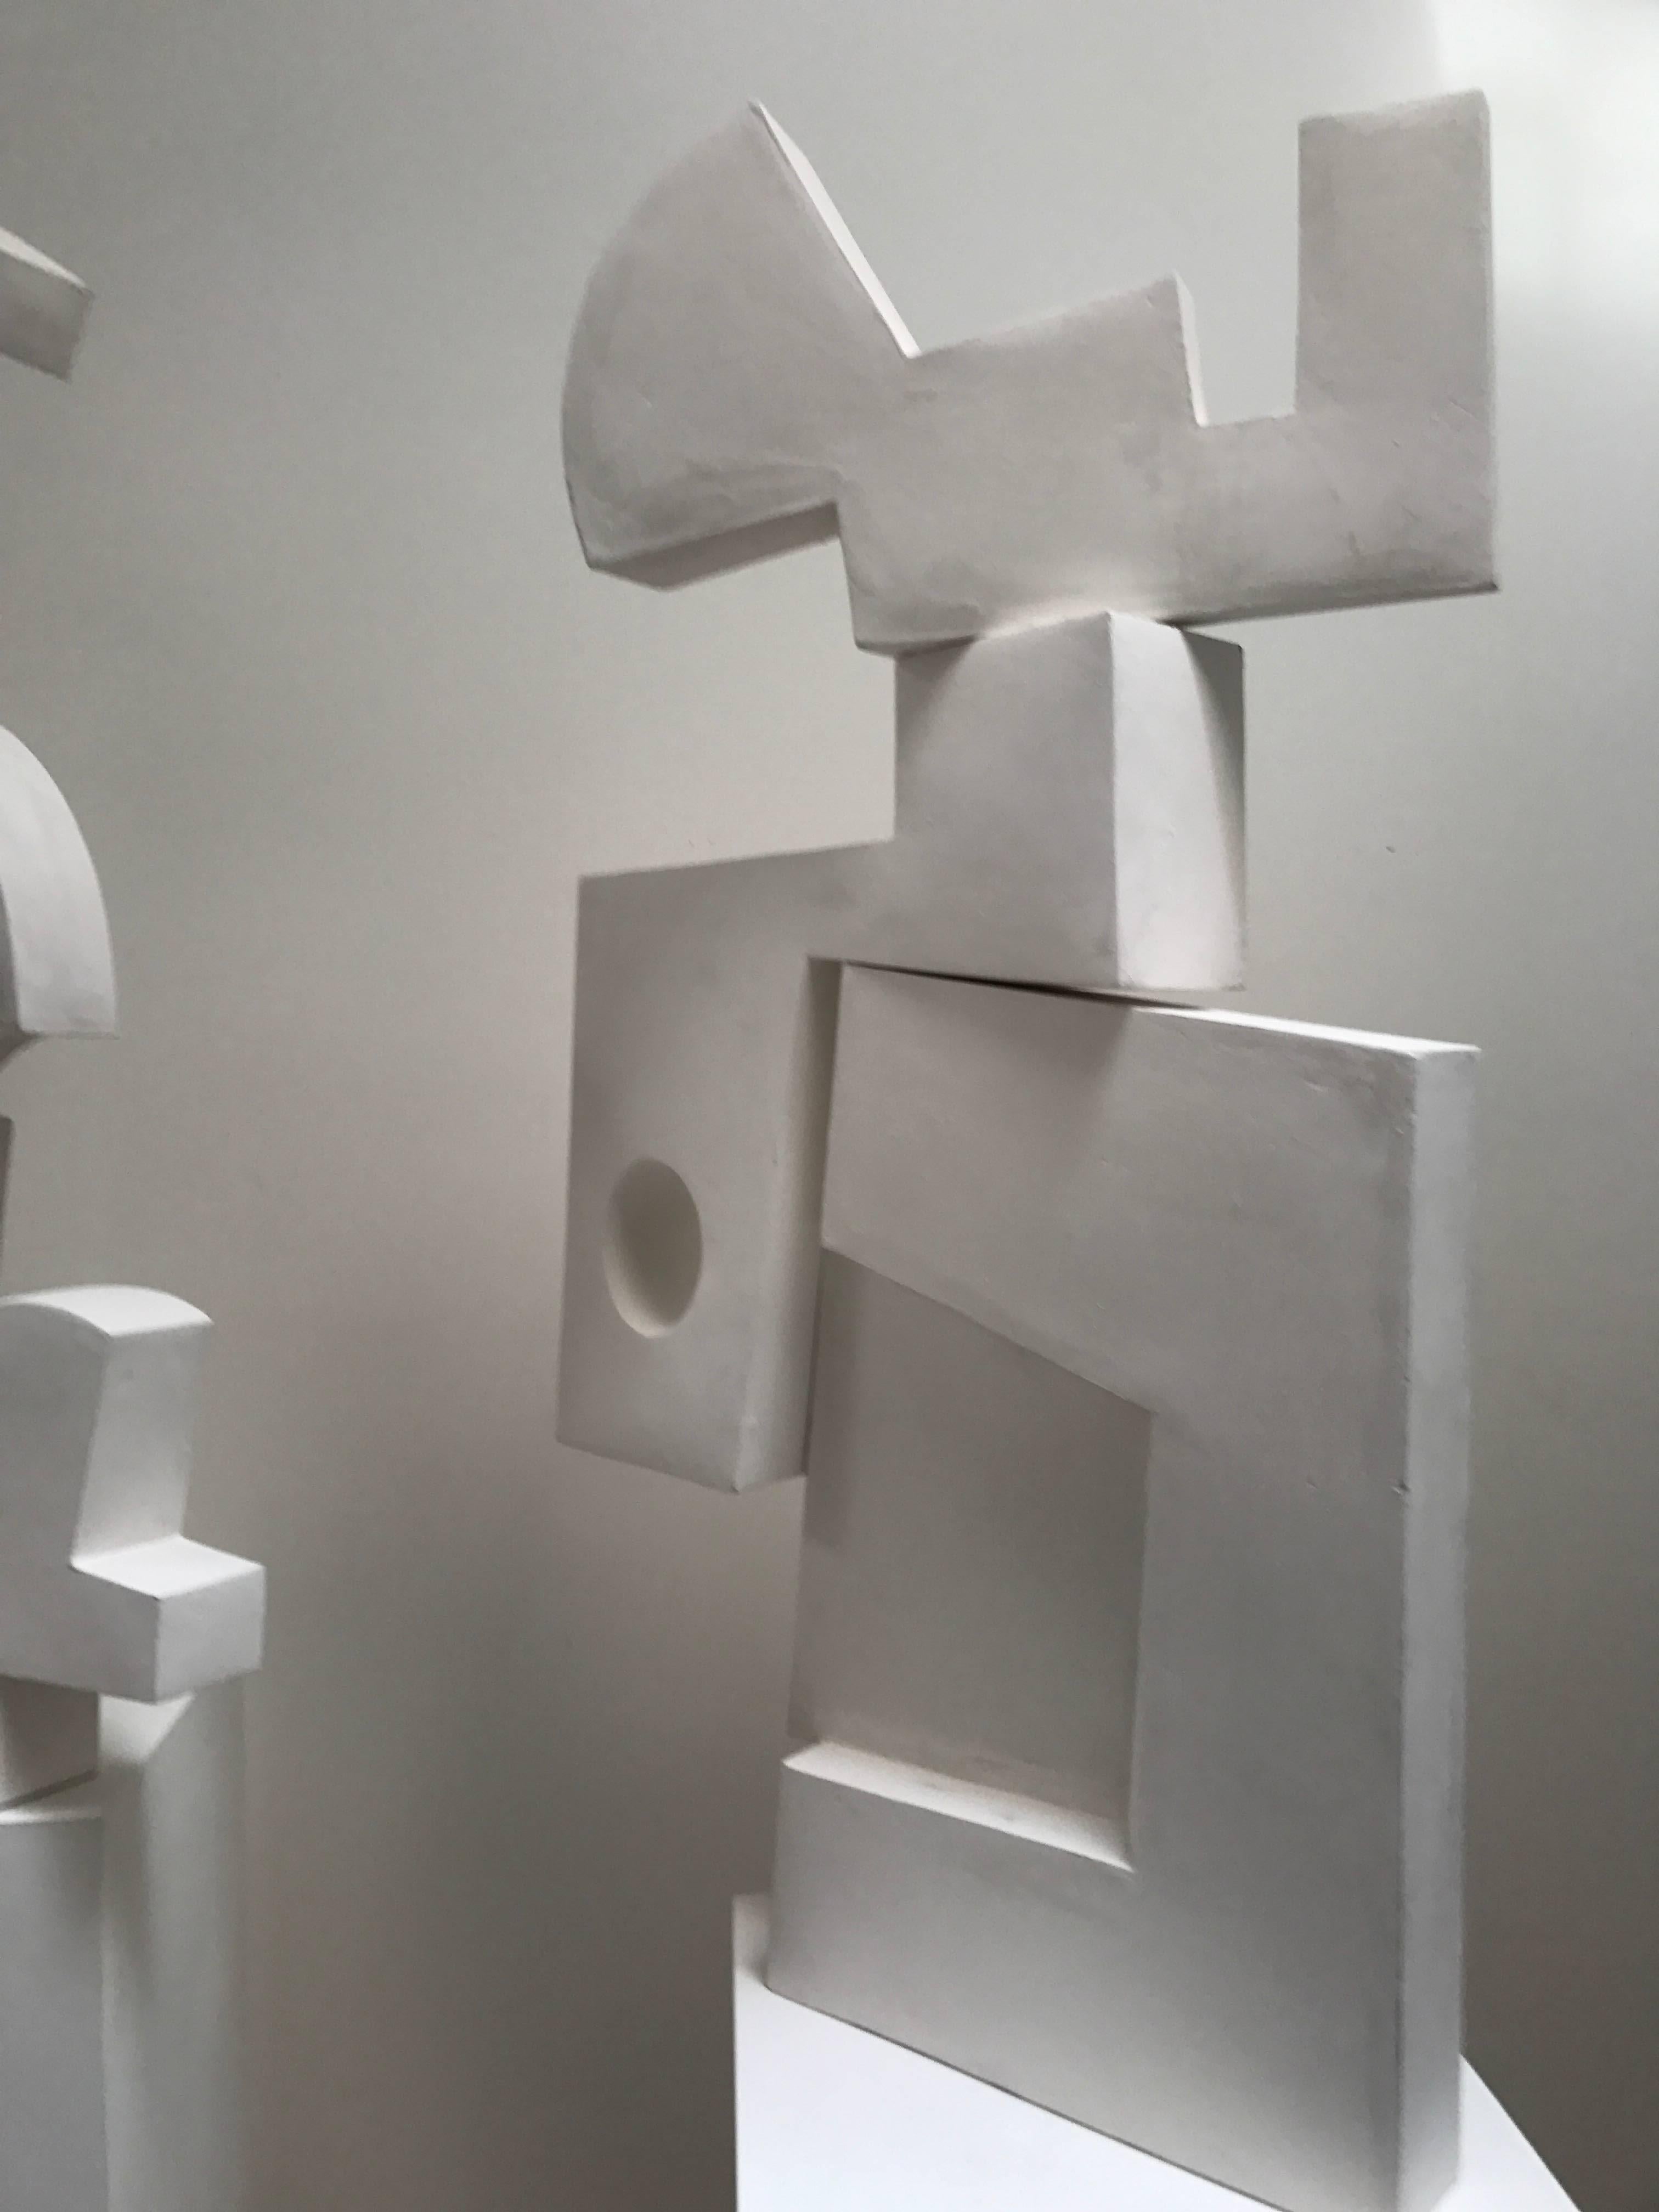 Great Britain (UK) Abstract Pair of Modernist Sculptures in Plaster by Gareth D. Smith For Sale